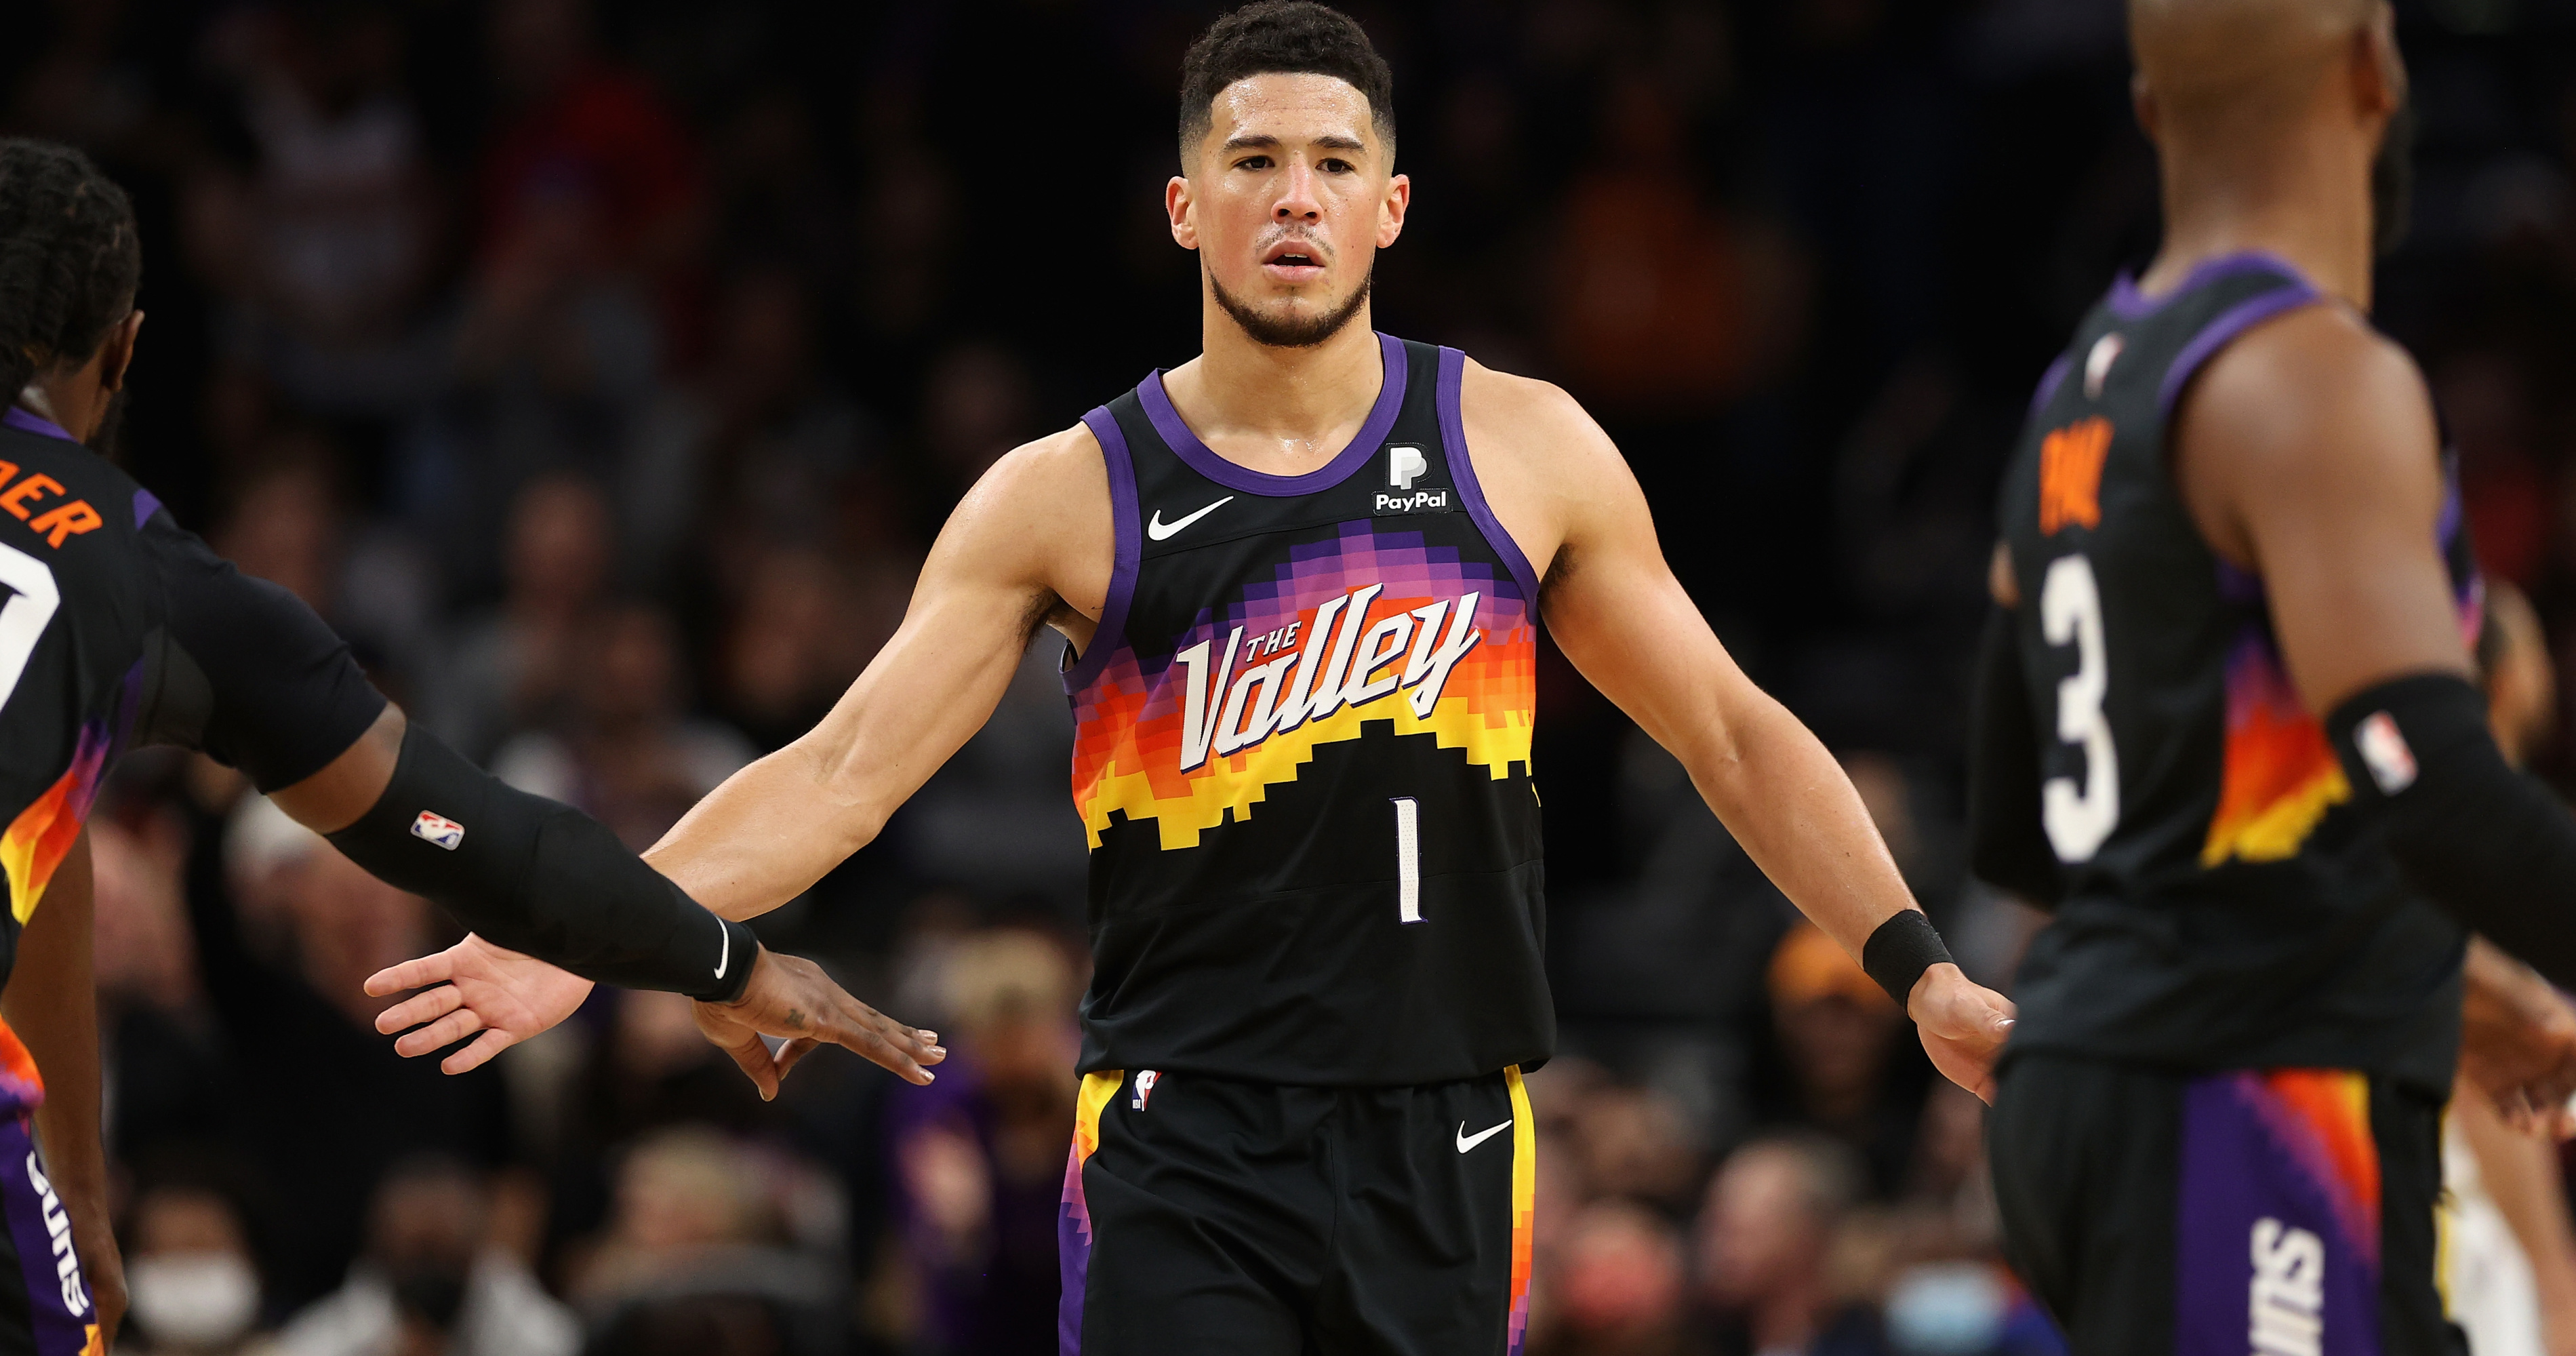 Suns Uniform Tracker on X: Devin Booker giving us a sneak peek at the new  Suns uniforms. Notice that the trim patterns match my latest predictions.  You can also see a little